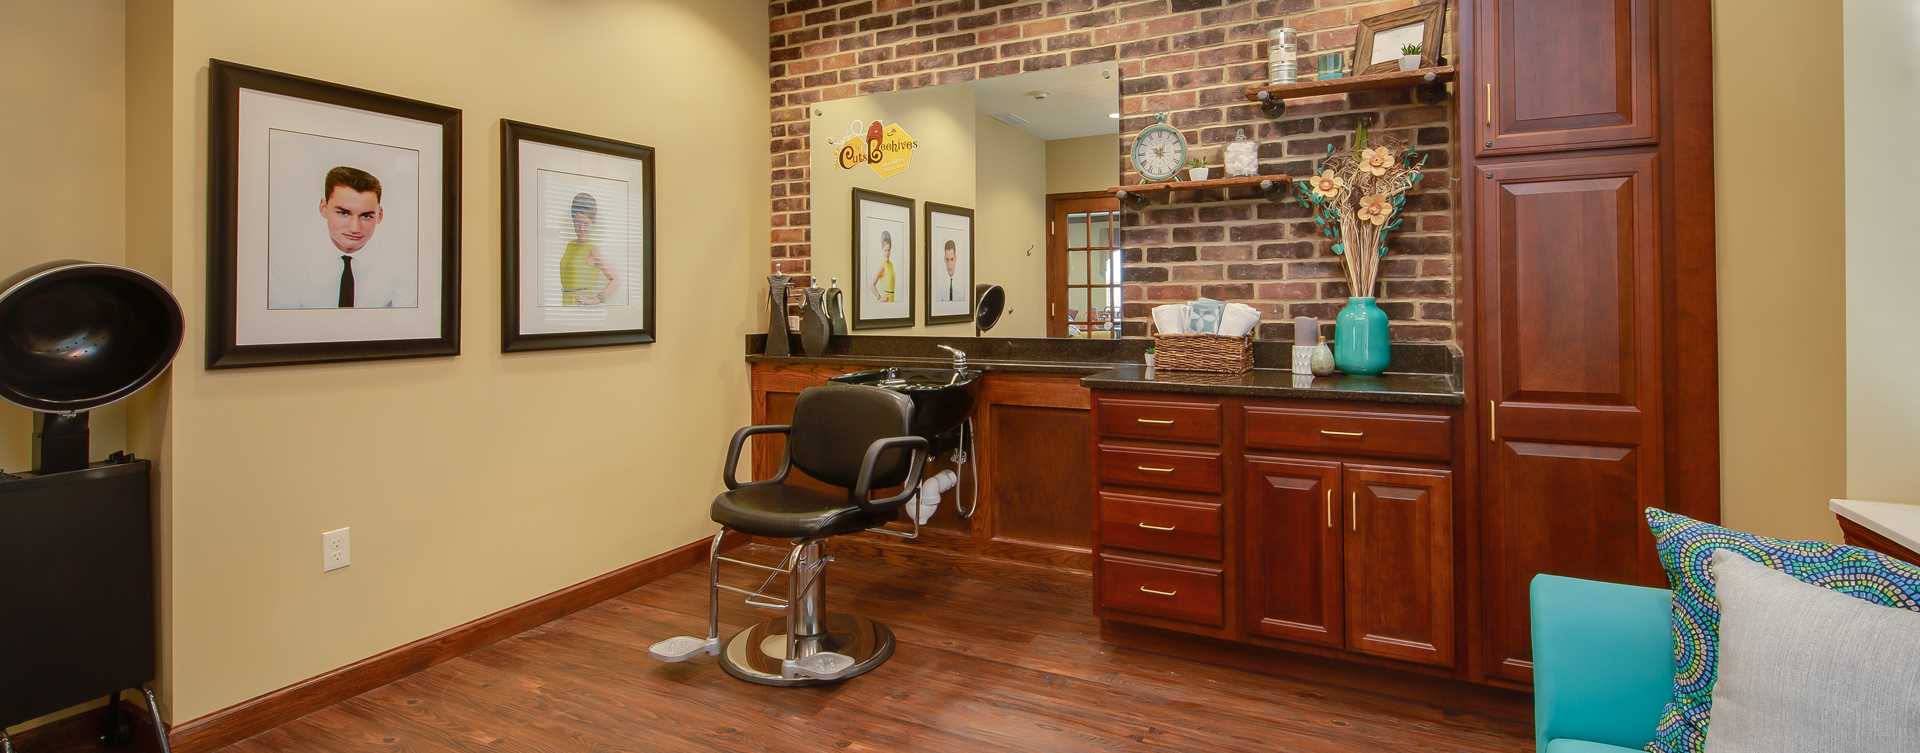 Strut on in and find out what the buzz is all about in the salon at Bickford of Portage